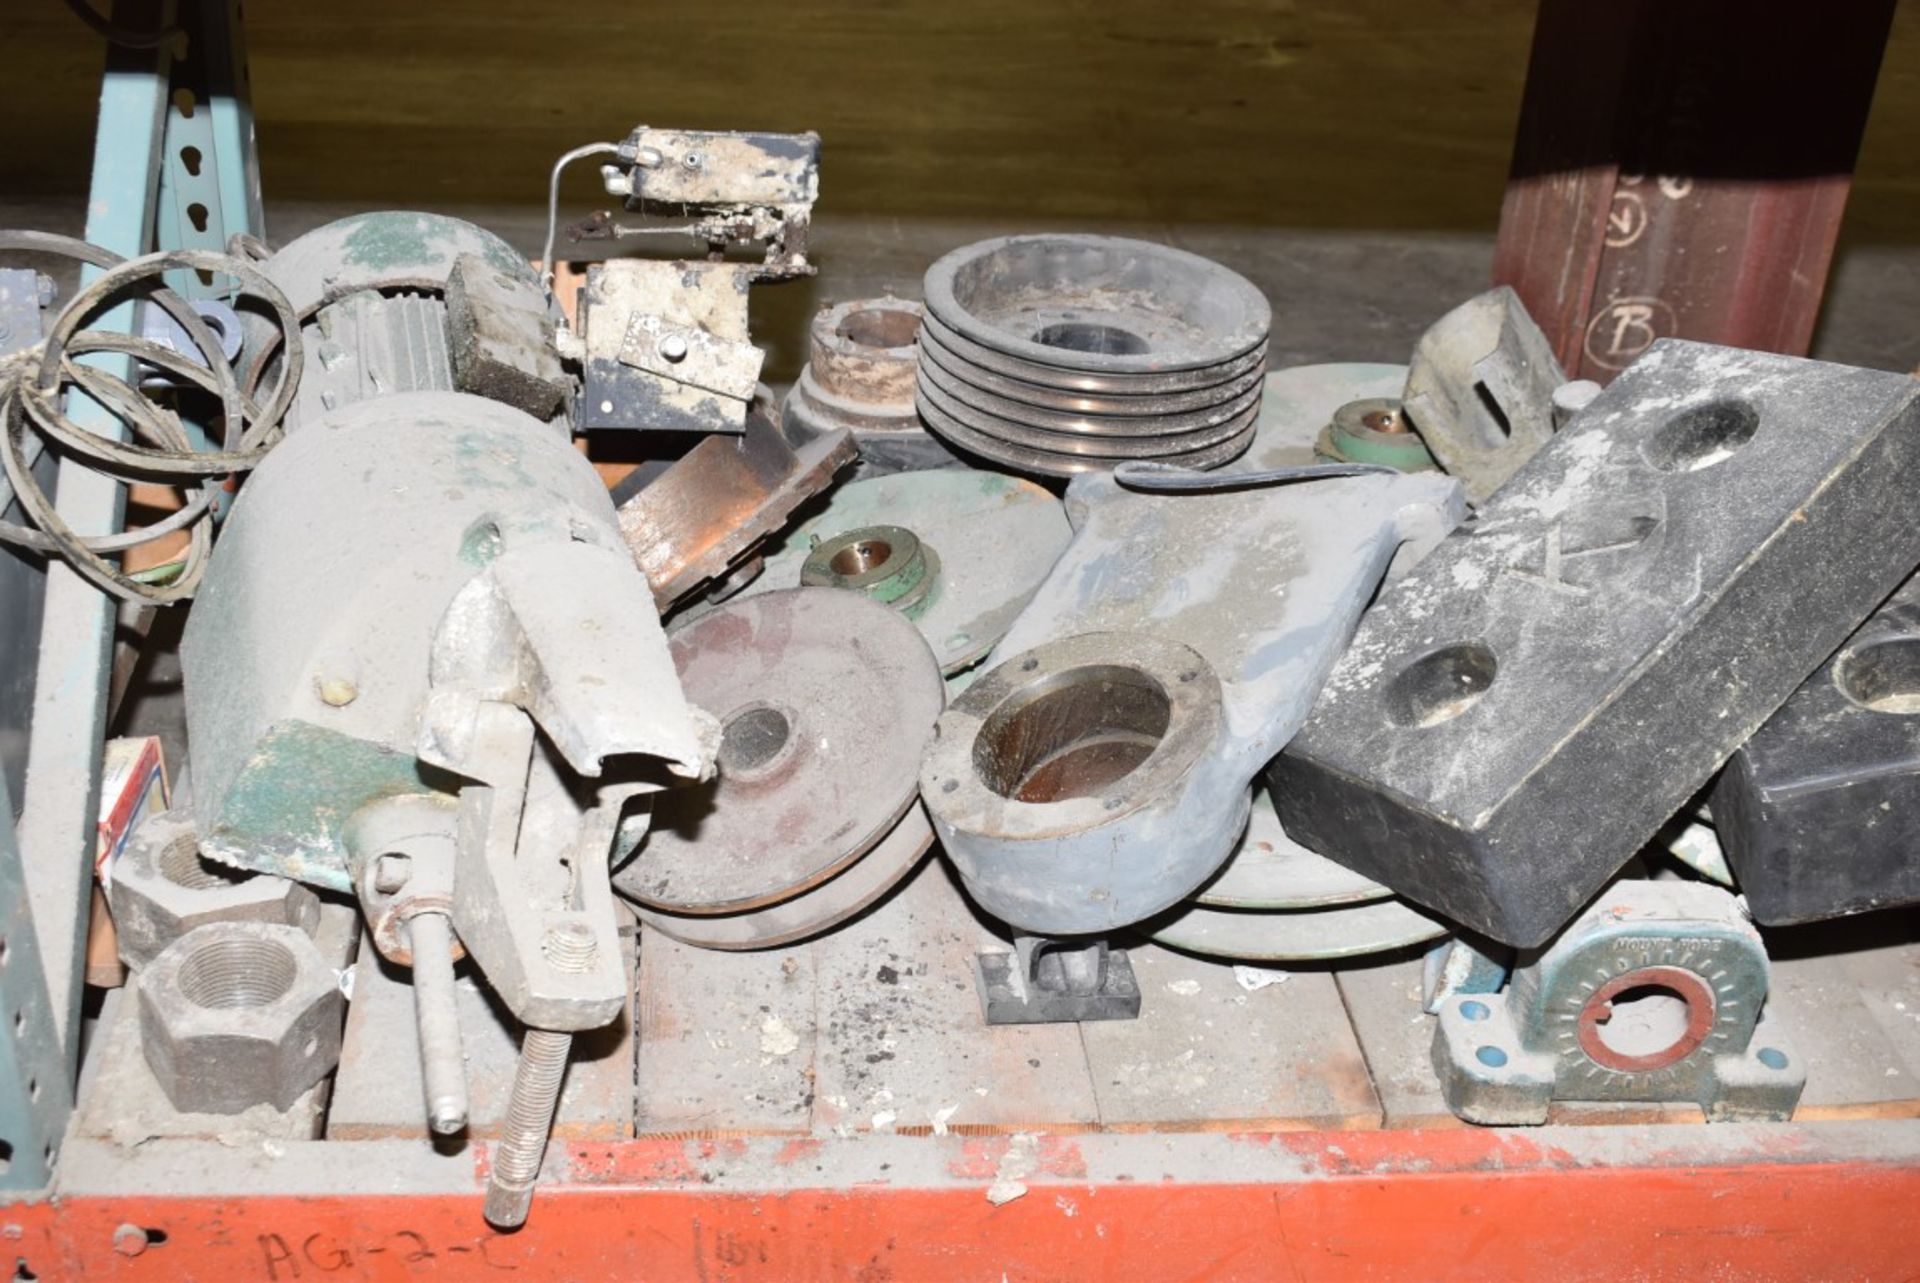 LOT/ CONTENTS OF BUNK - INCLUDING SPARE MOTOR, PILLOW BLOCKS, PULLEYS, ACTUATED VALVES, SPARE PARTS - Image 6 of 8